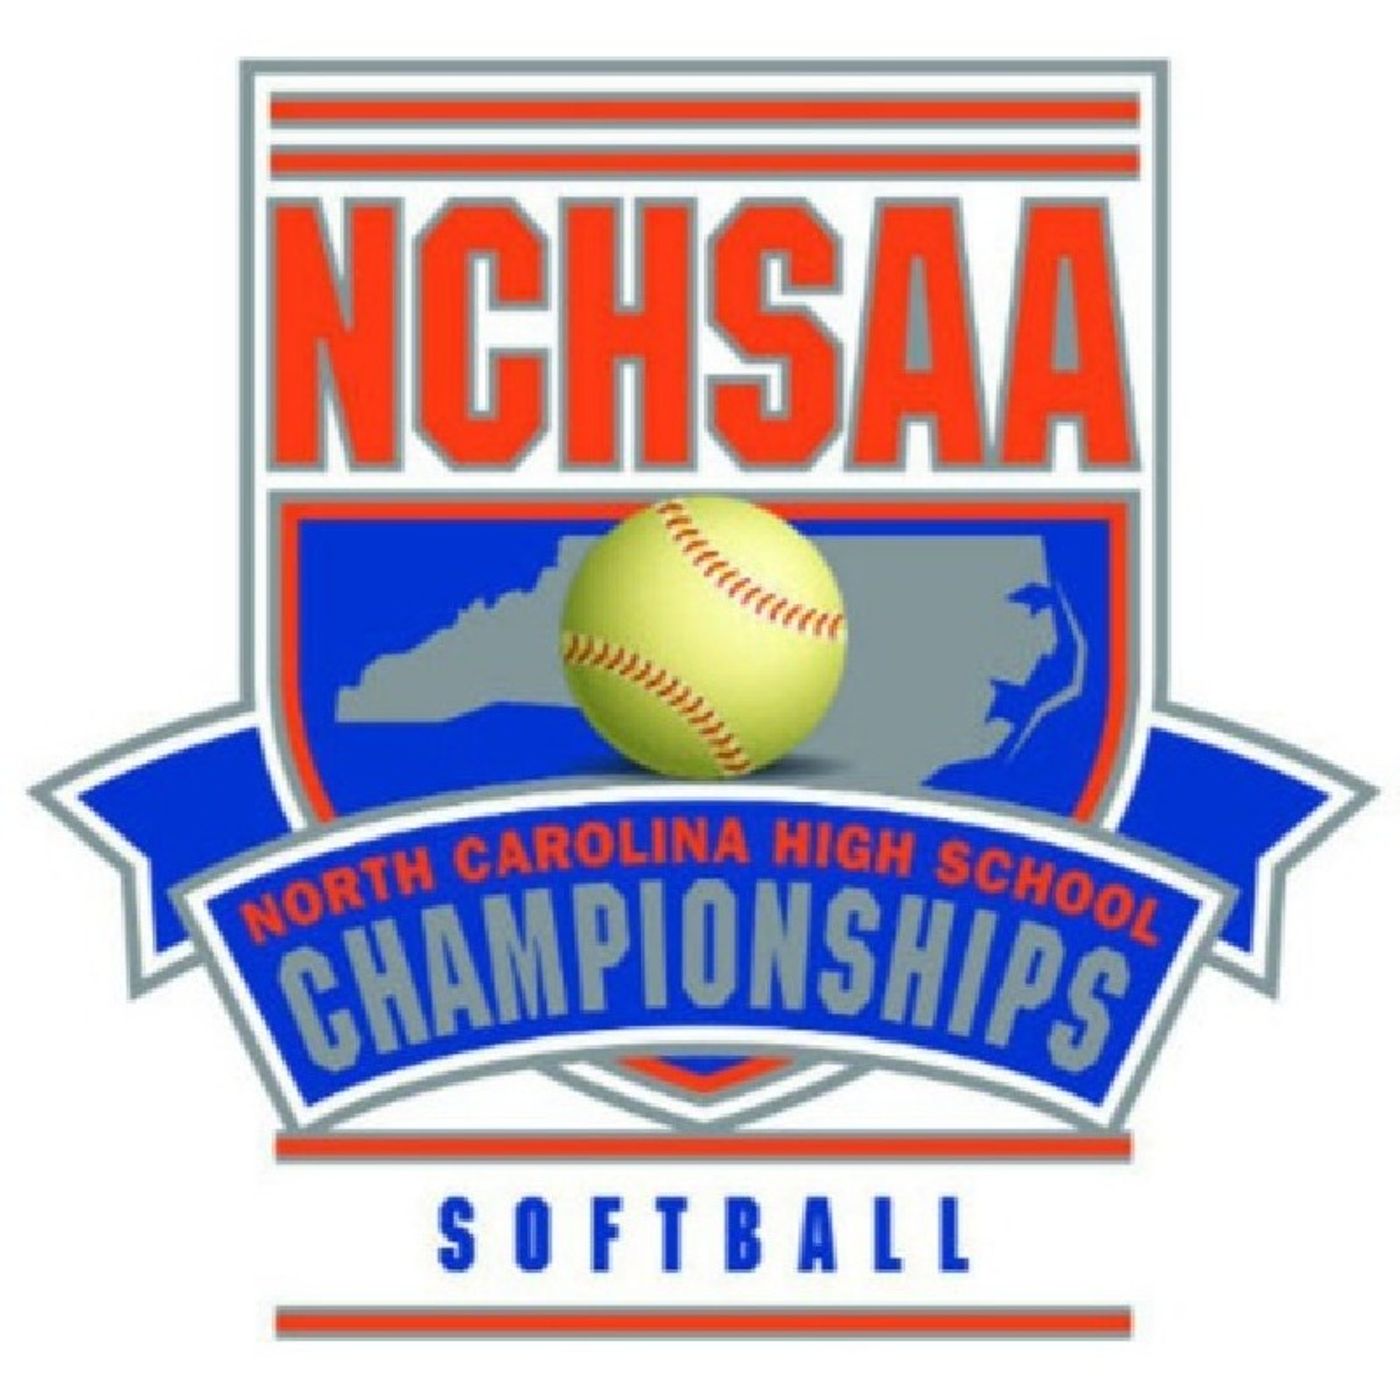 #NCHSAA 4th Round State Softball Championship Playoffs Clayton Comets vs. DH Conley Vikings from Greenville, NC! #WeAreCRN #cometsVSeveryone